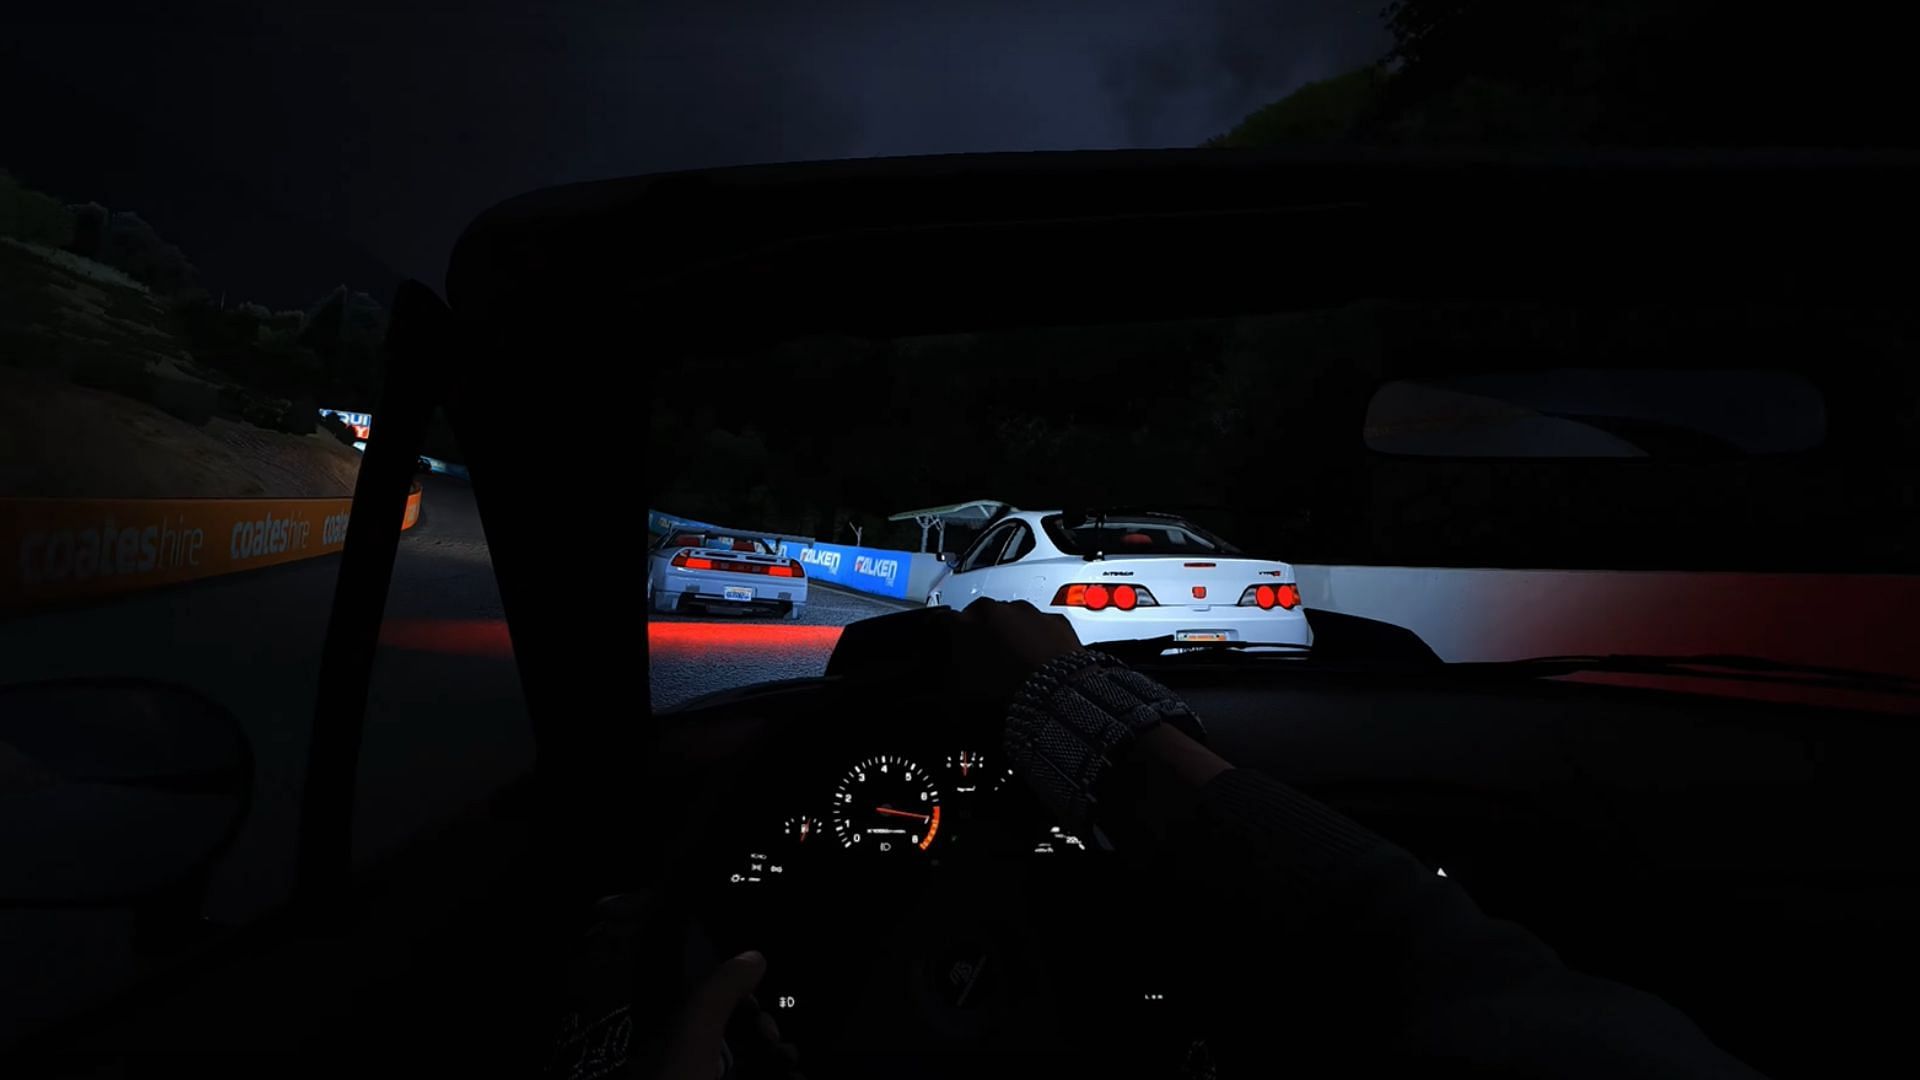 A screenshot from the modded night racing gameplay. (Image via YouTube/@Gam3_4_Lif3)